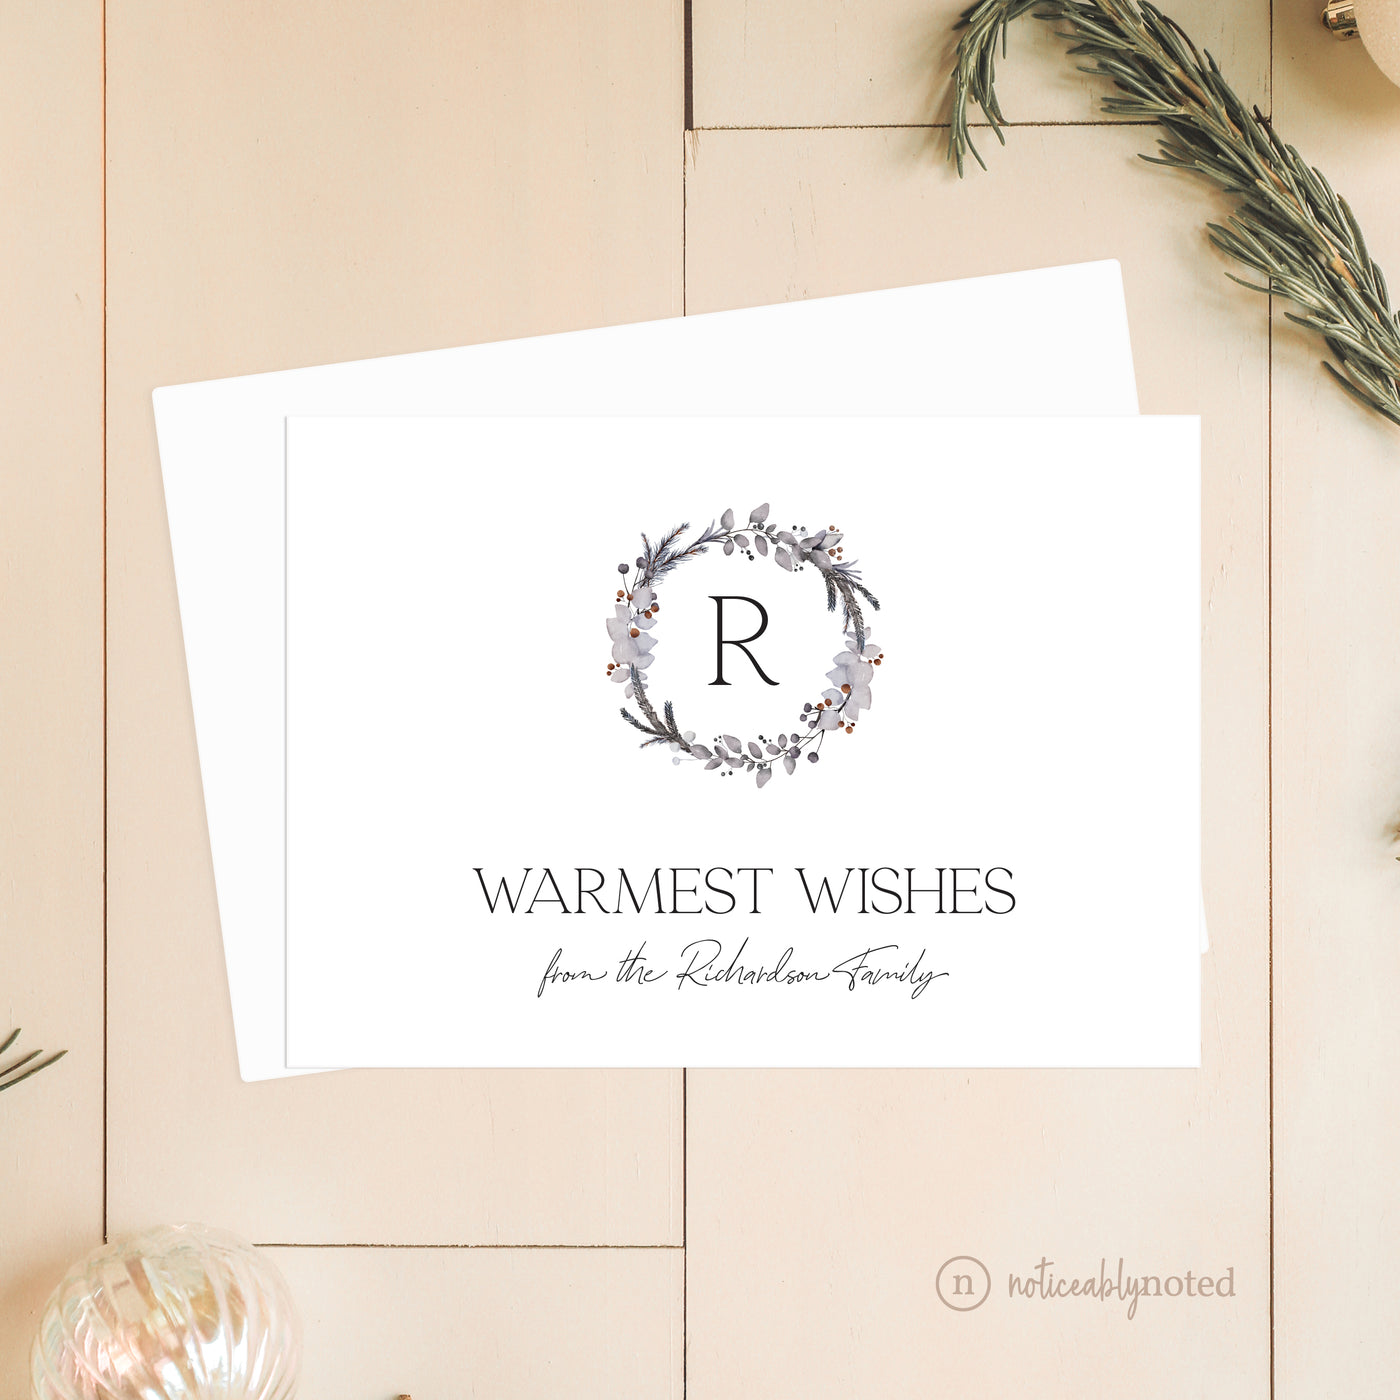 Silver Wreath Holiday Cards | Noticeably Noted